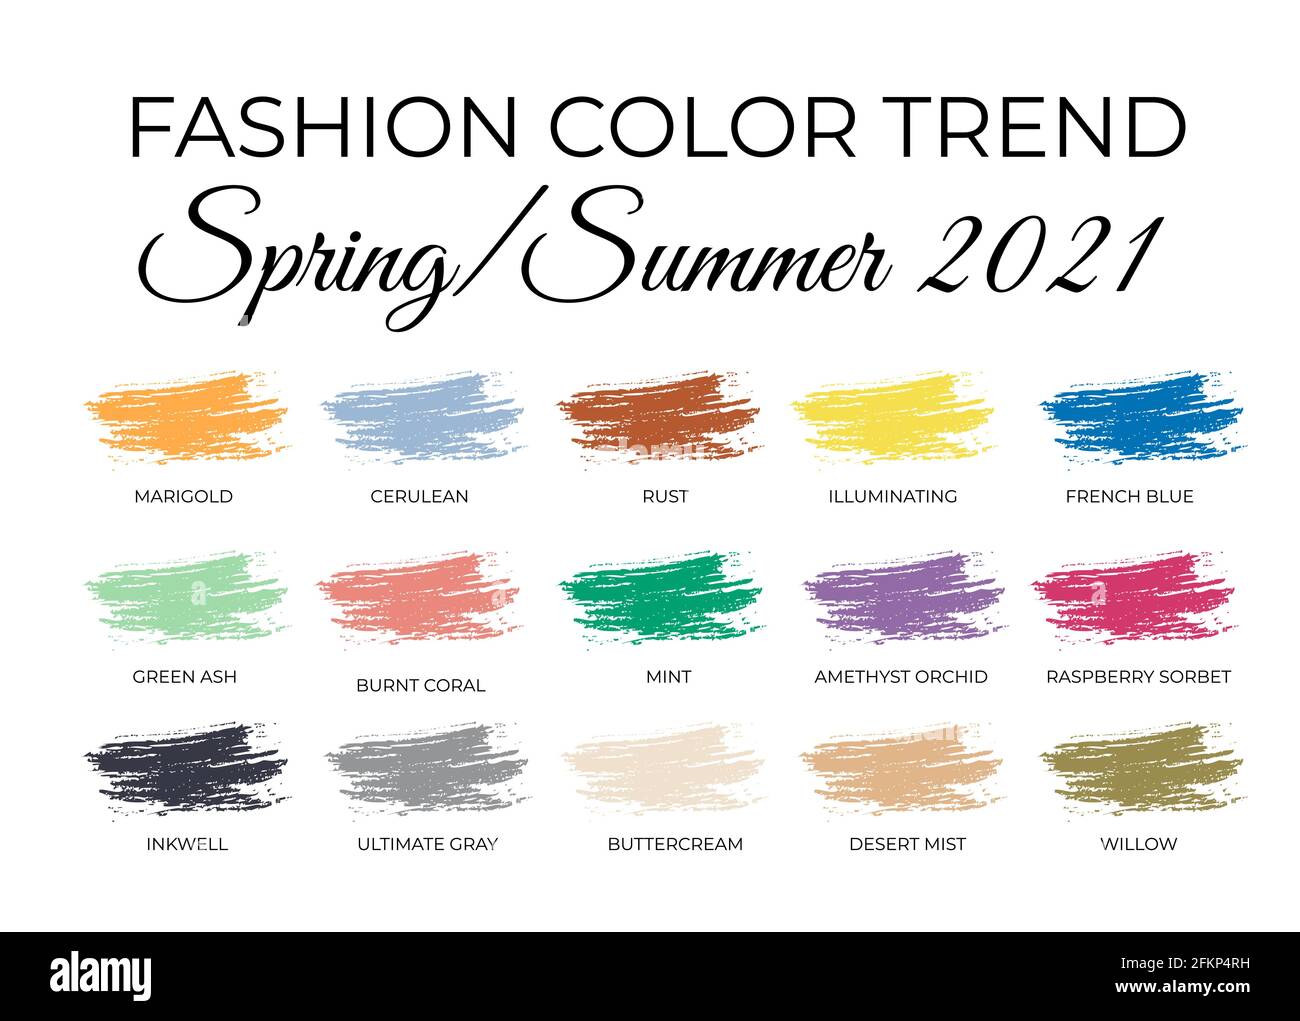 Fashion Color Trends Spring Summer 2021. Trendy colors palette guide ...